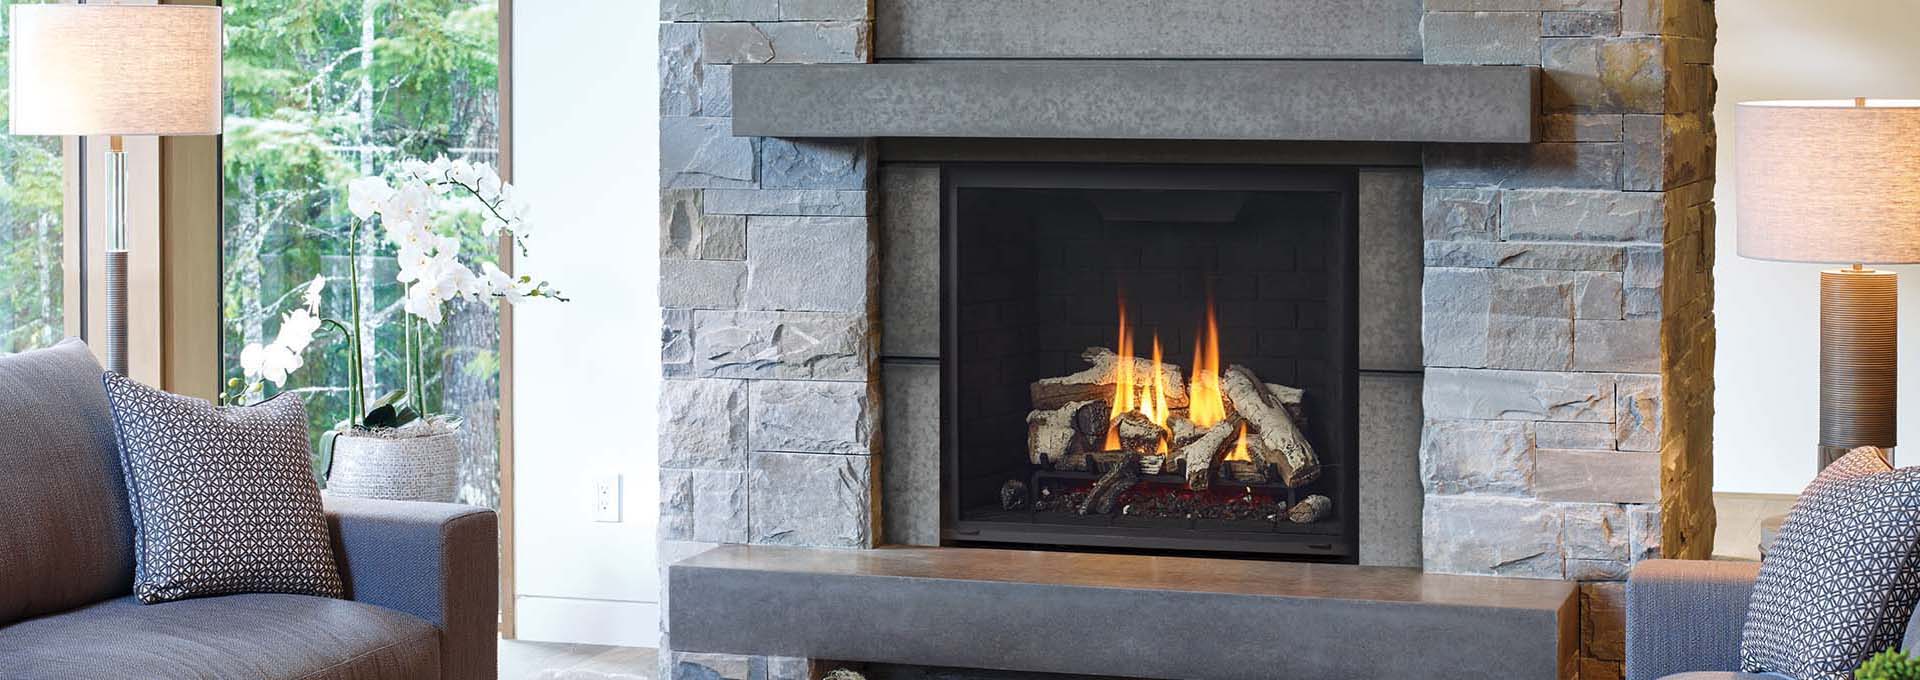 High Quality Fireplaces Inserts, Wood Burning Fireplace Manufacturers Canada